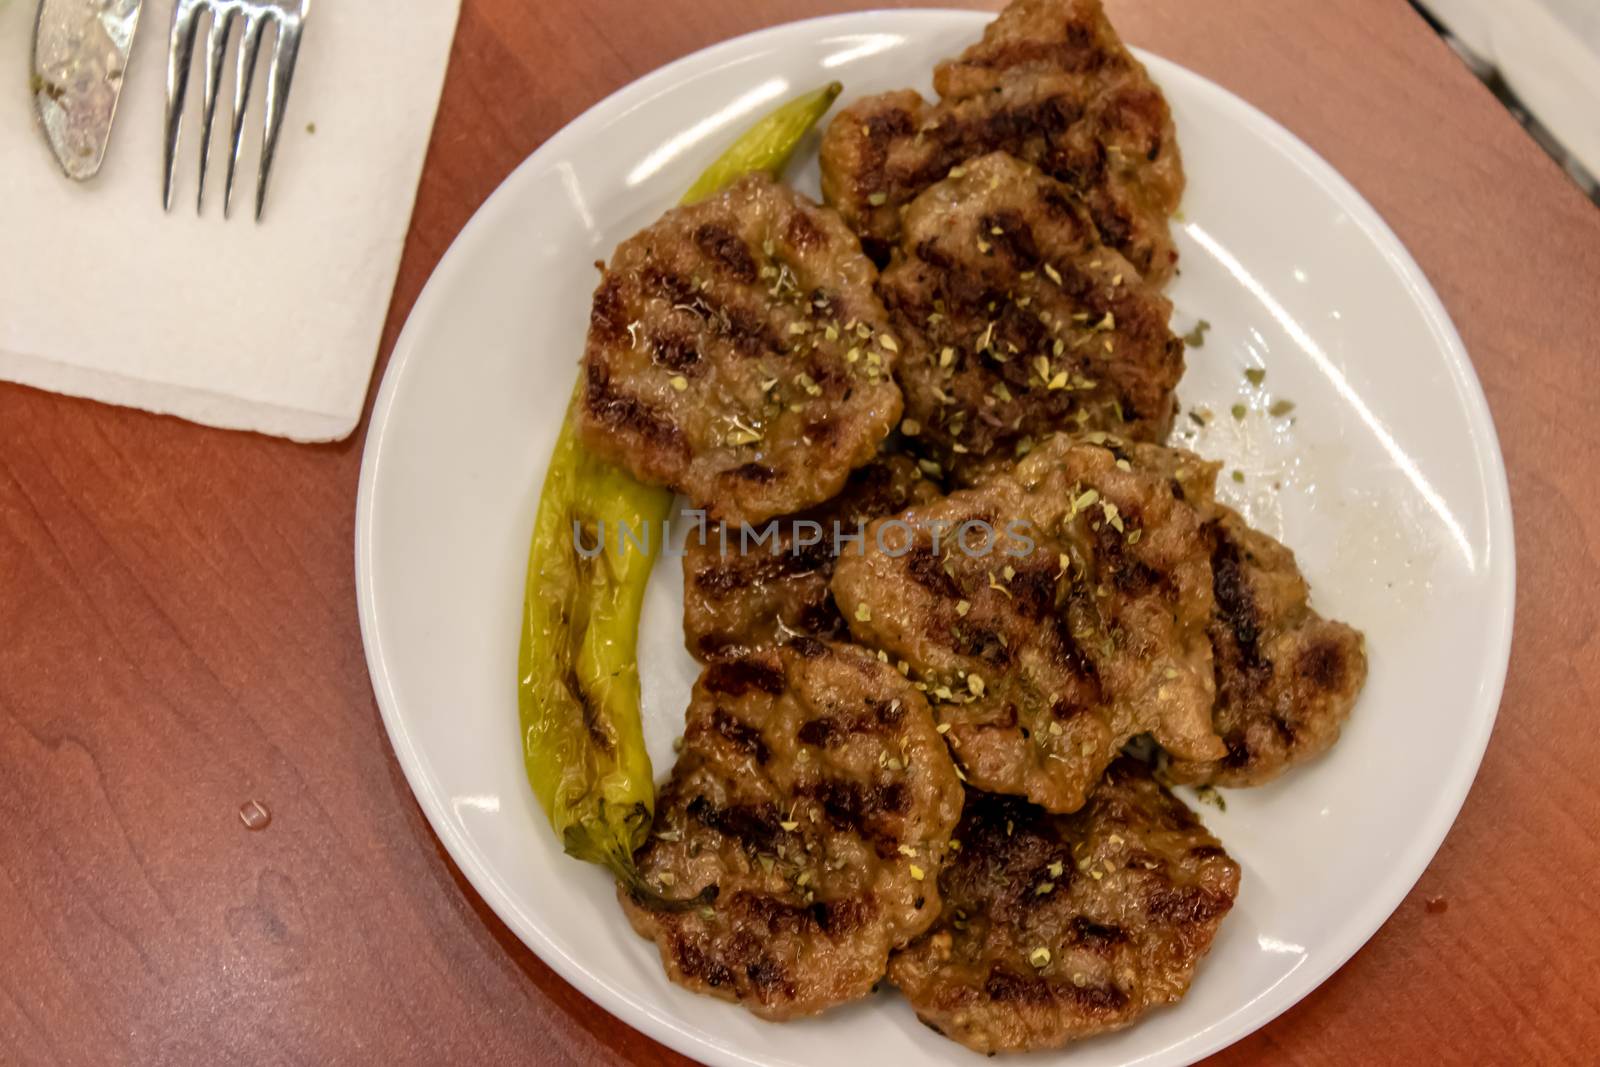 an upper view shoot to meat and some fried pepper. this food photo has taken at a restaurant.